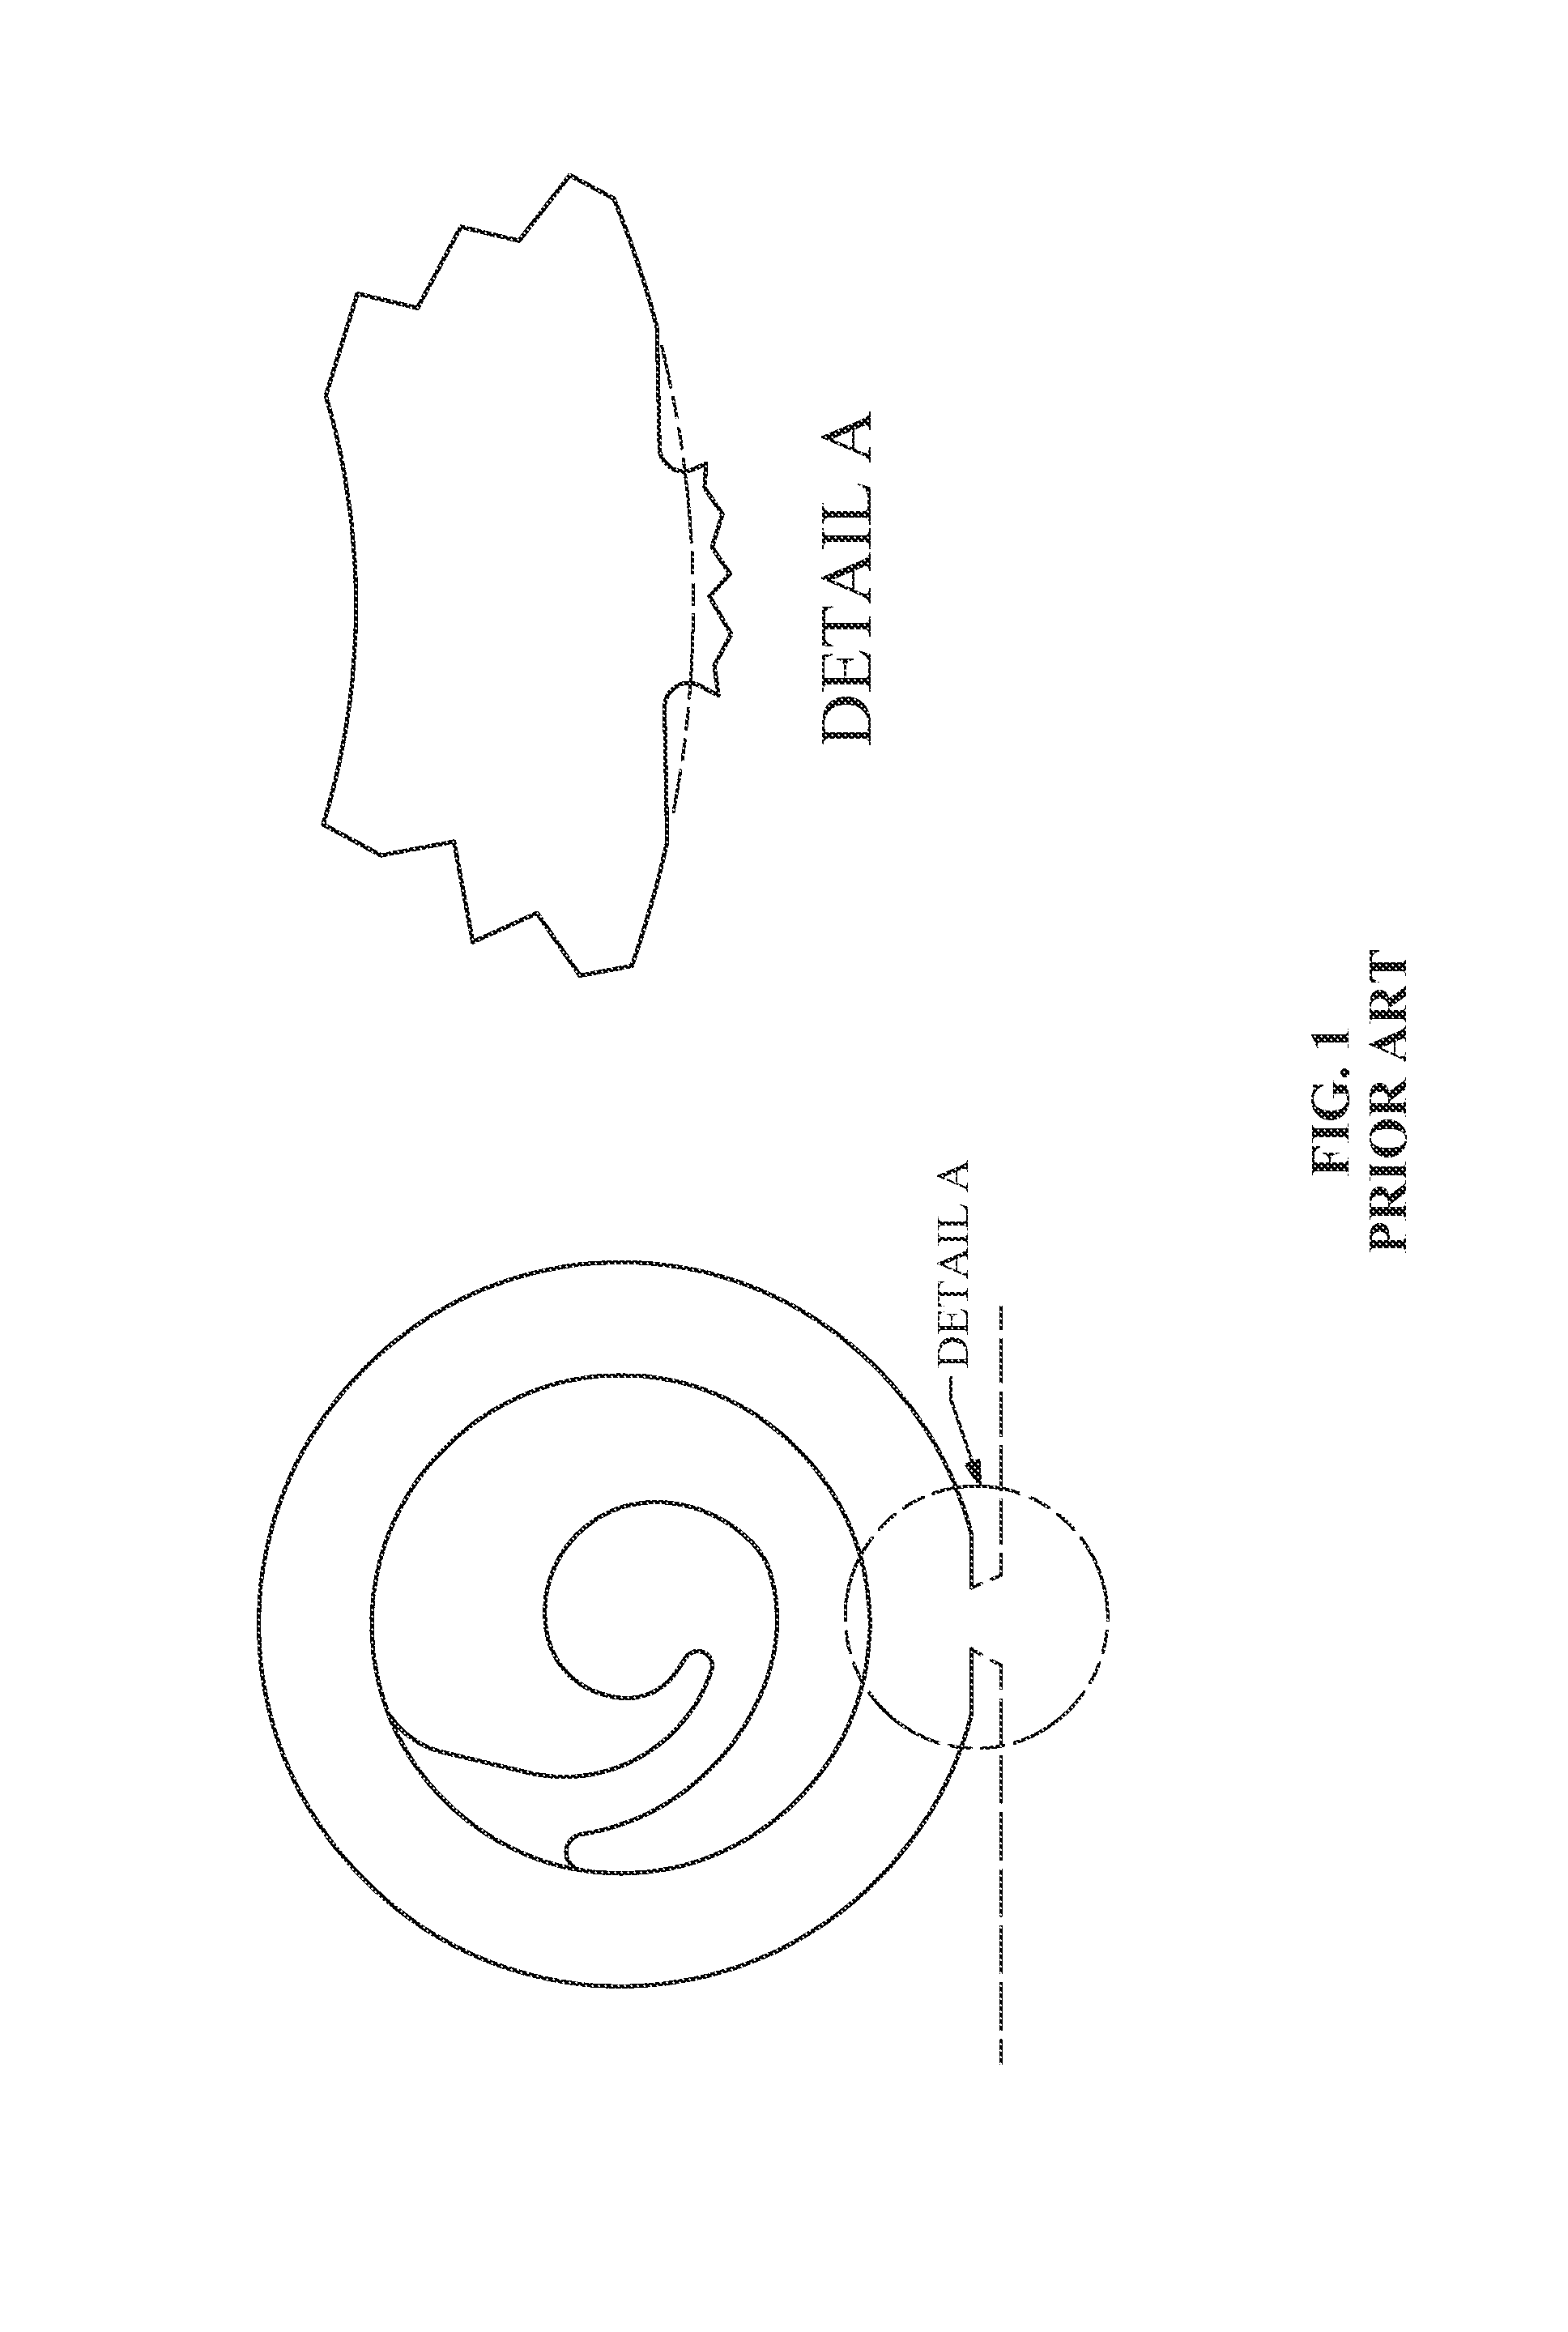 Spring contact, inertia switch, and method of manufacturing an inertia switch